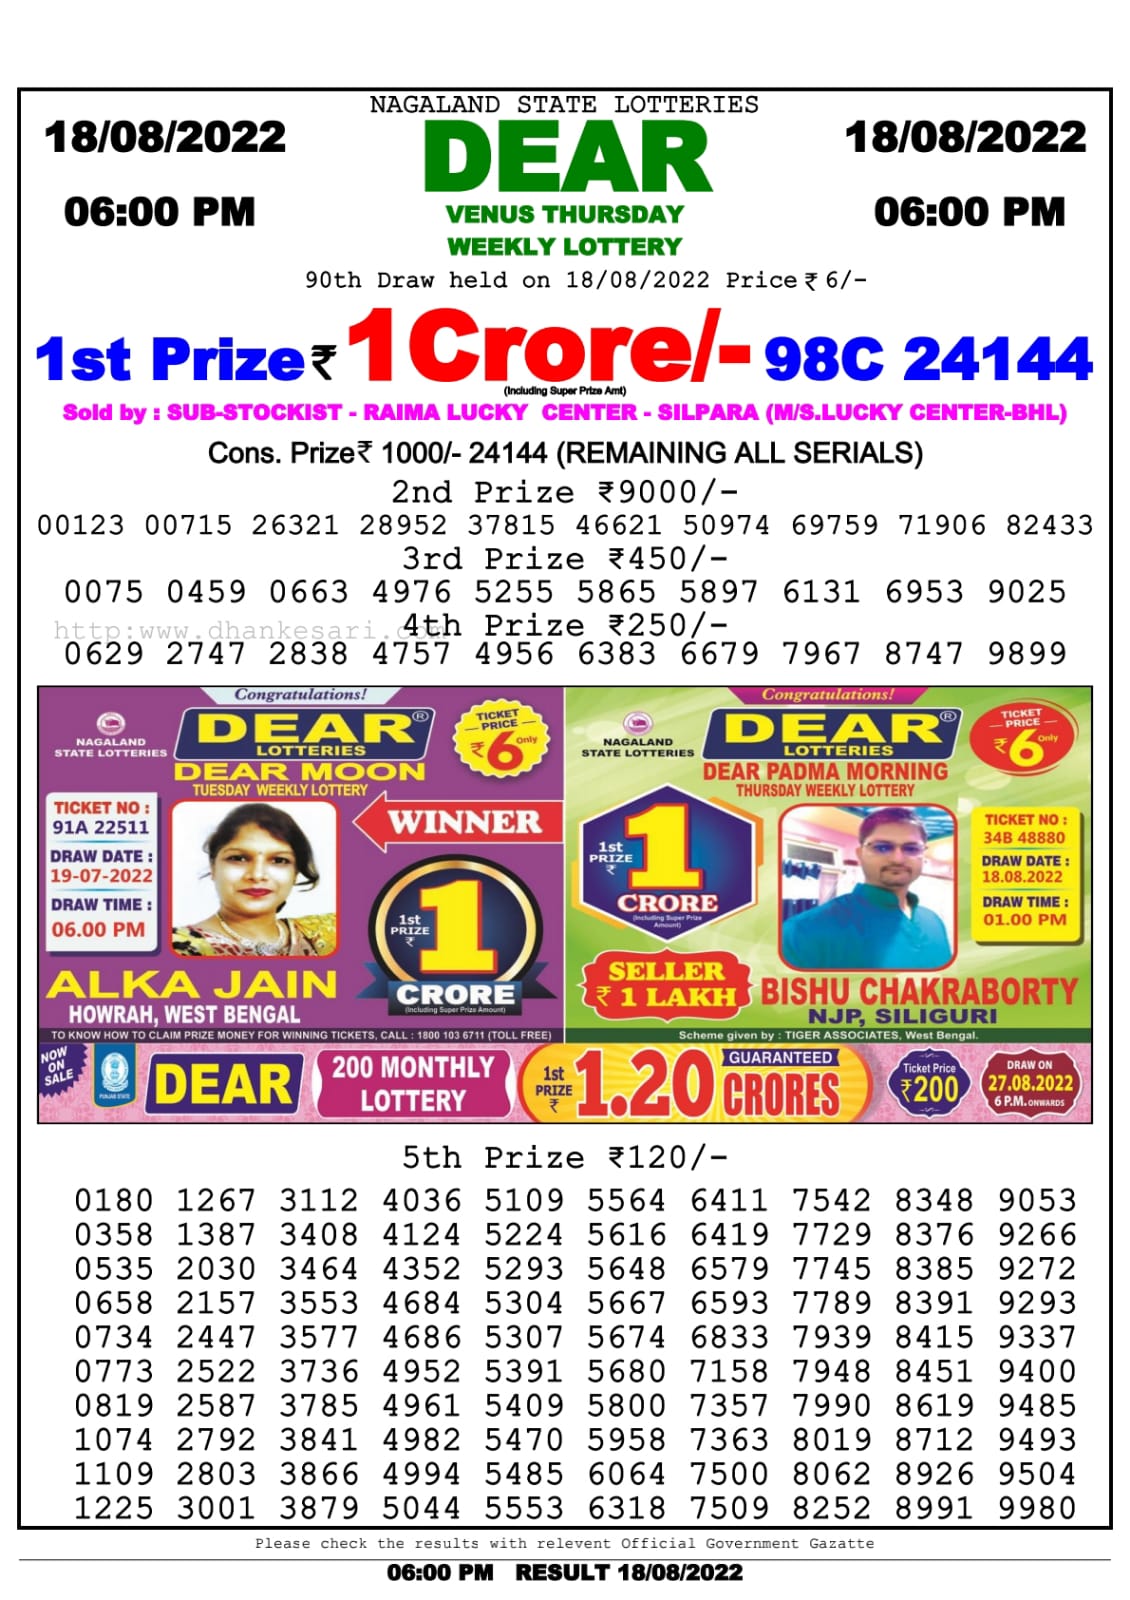 Dear Lottery Nagaland state Lottery Results 06.00 pm 18.08.2022